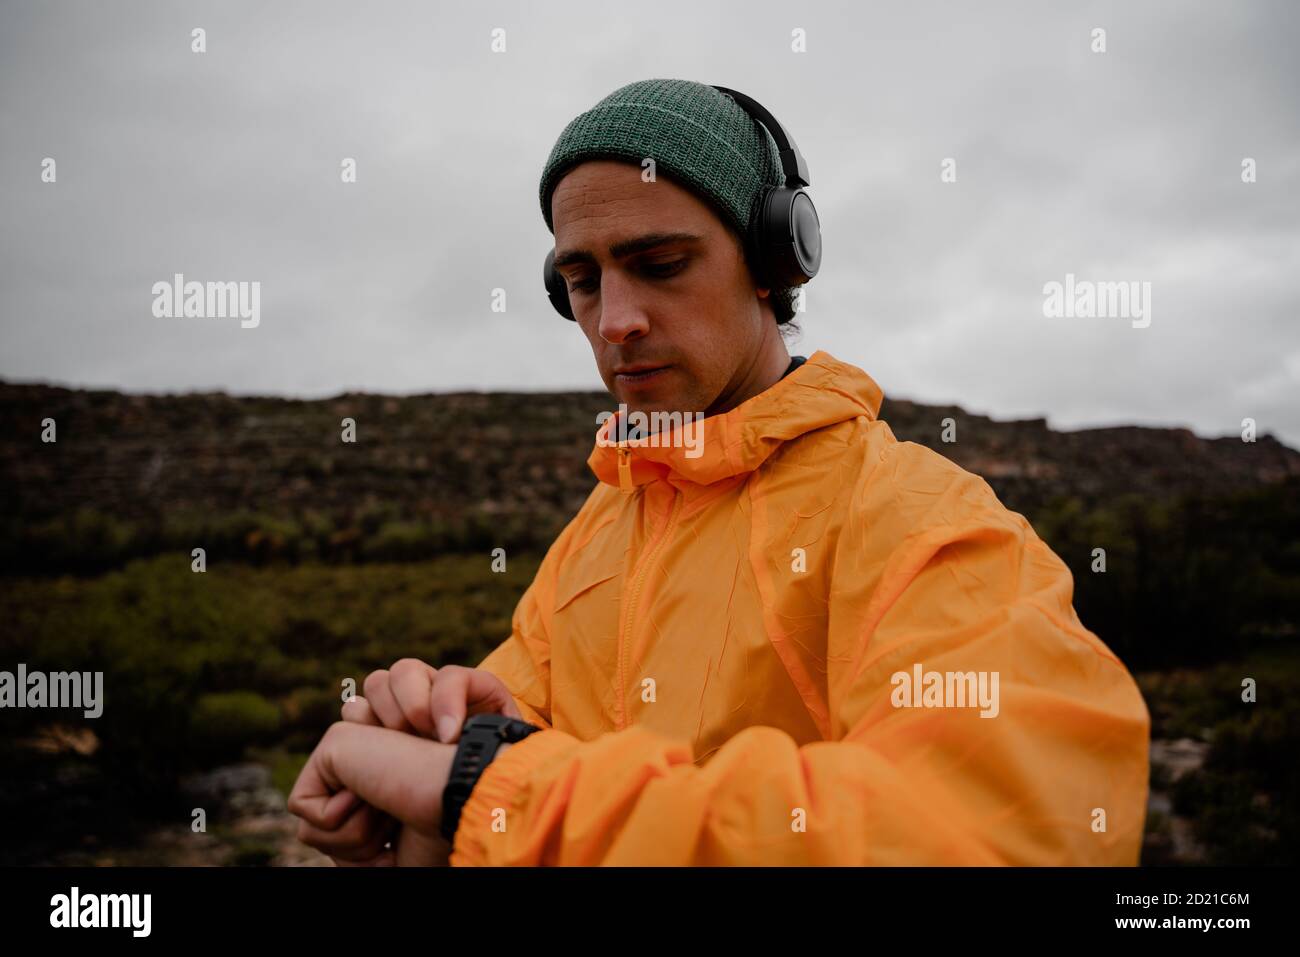 Fit young male athlete setting up smartwatch to track activity listening to music in headphones on run on mountain path Stock Photo